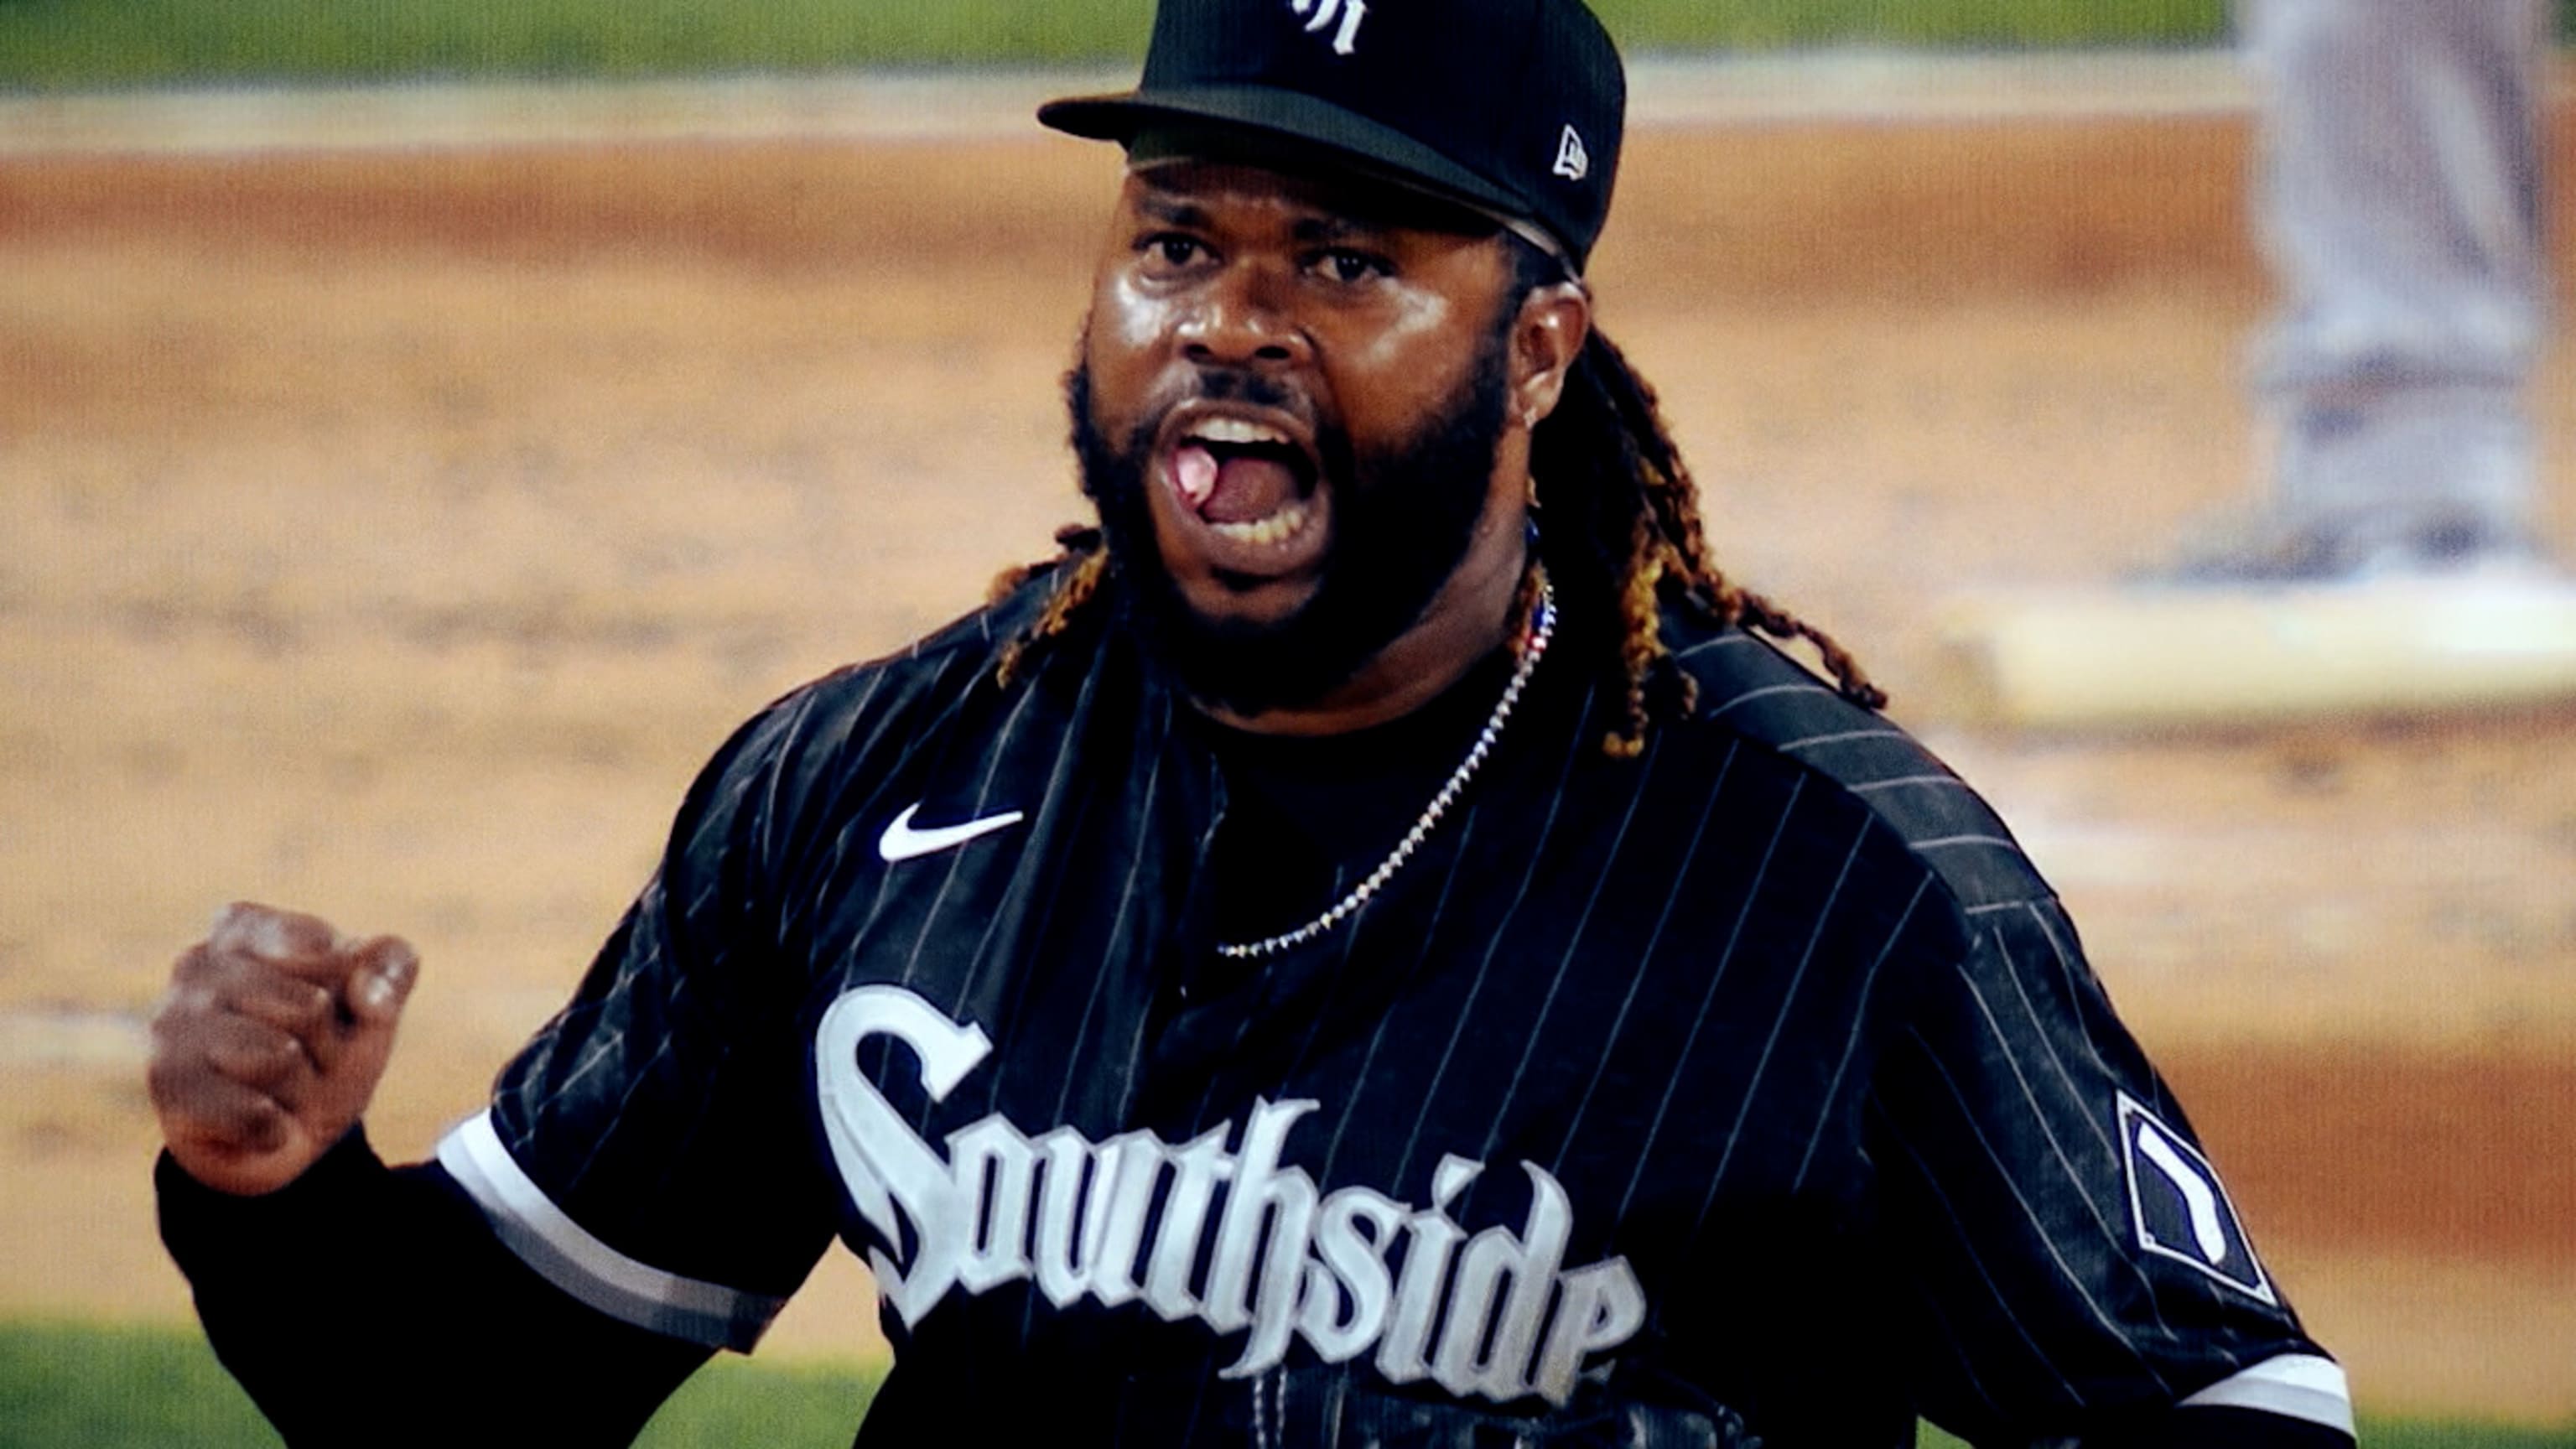 Johnny Cueto's race to the majors with the White Sox - South Side Sox